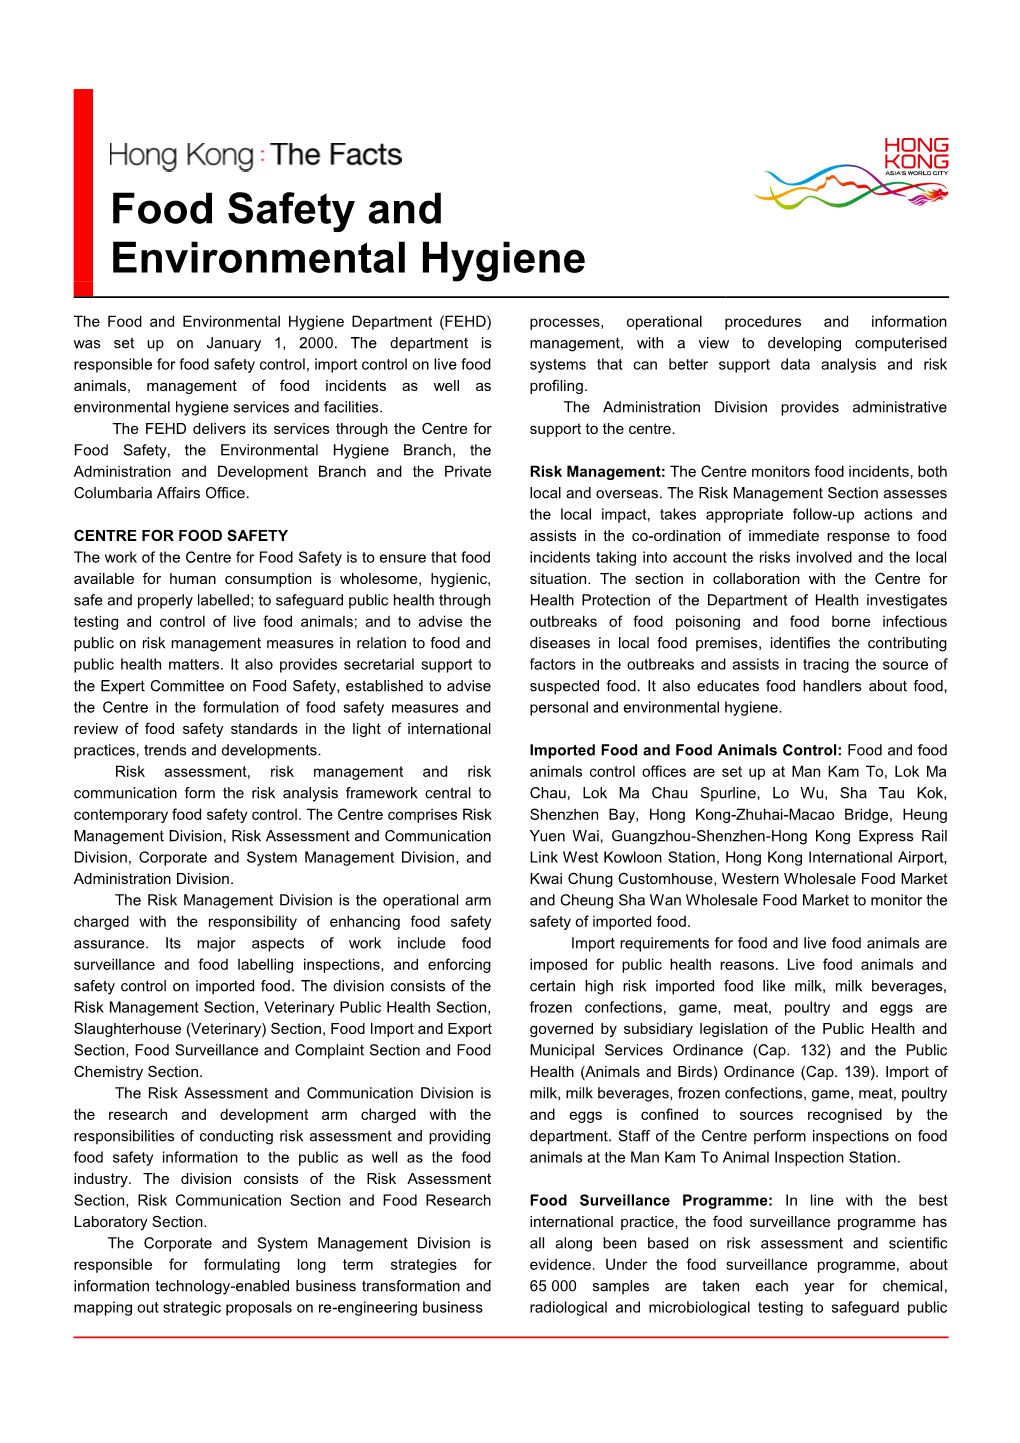 Food Safety and Environmental Hygiene